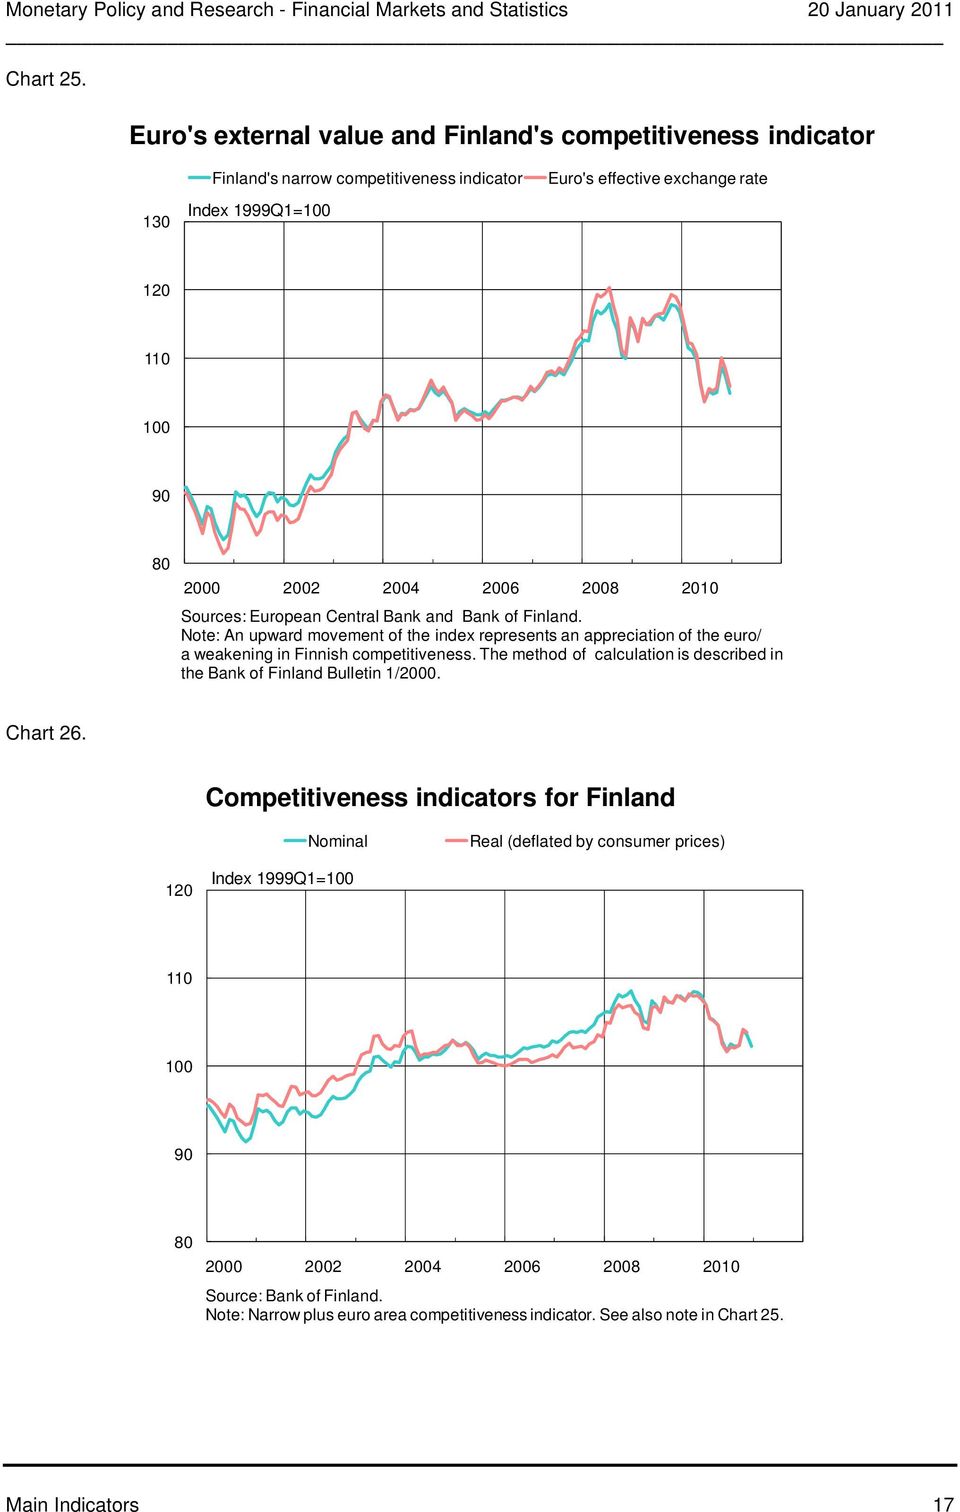 Central Bank and Bank of Finland. Note: An upward movement of the index represents an appreciation of the euro/ a weakening in Finnish competitiveness.